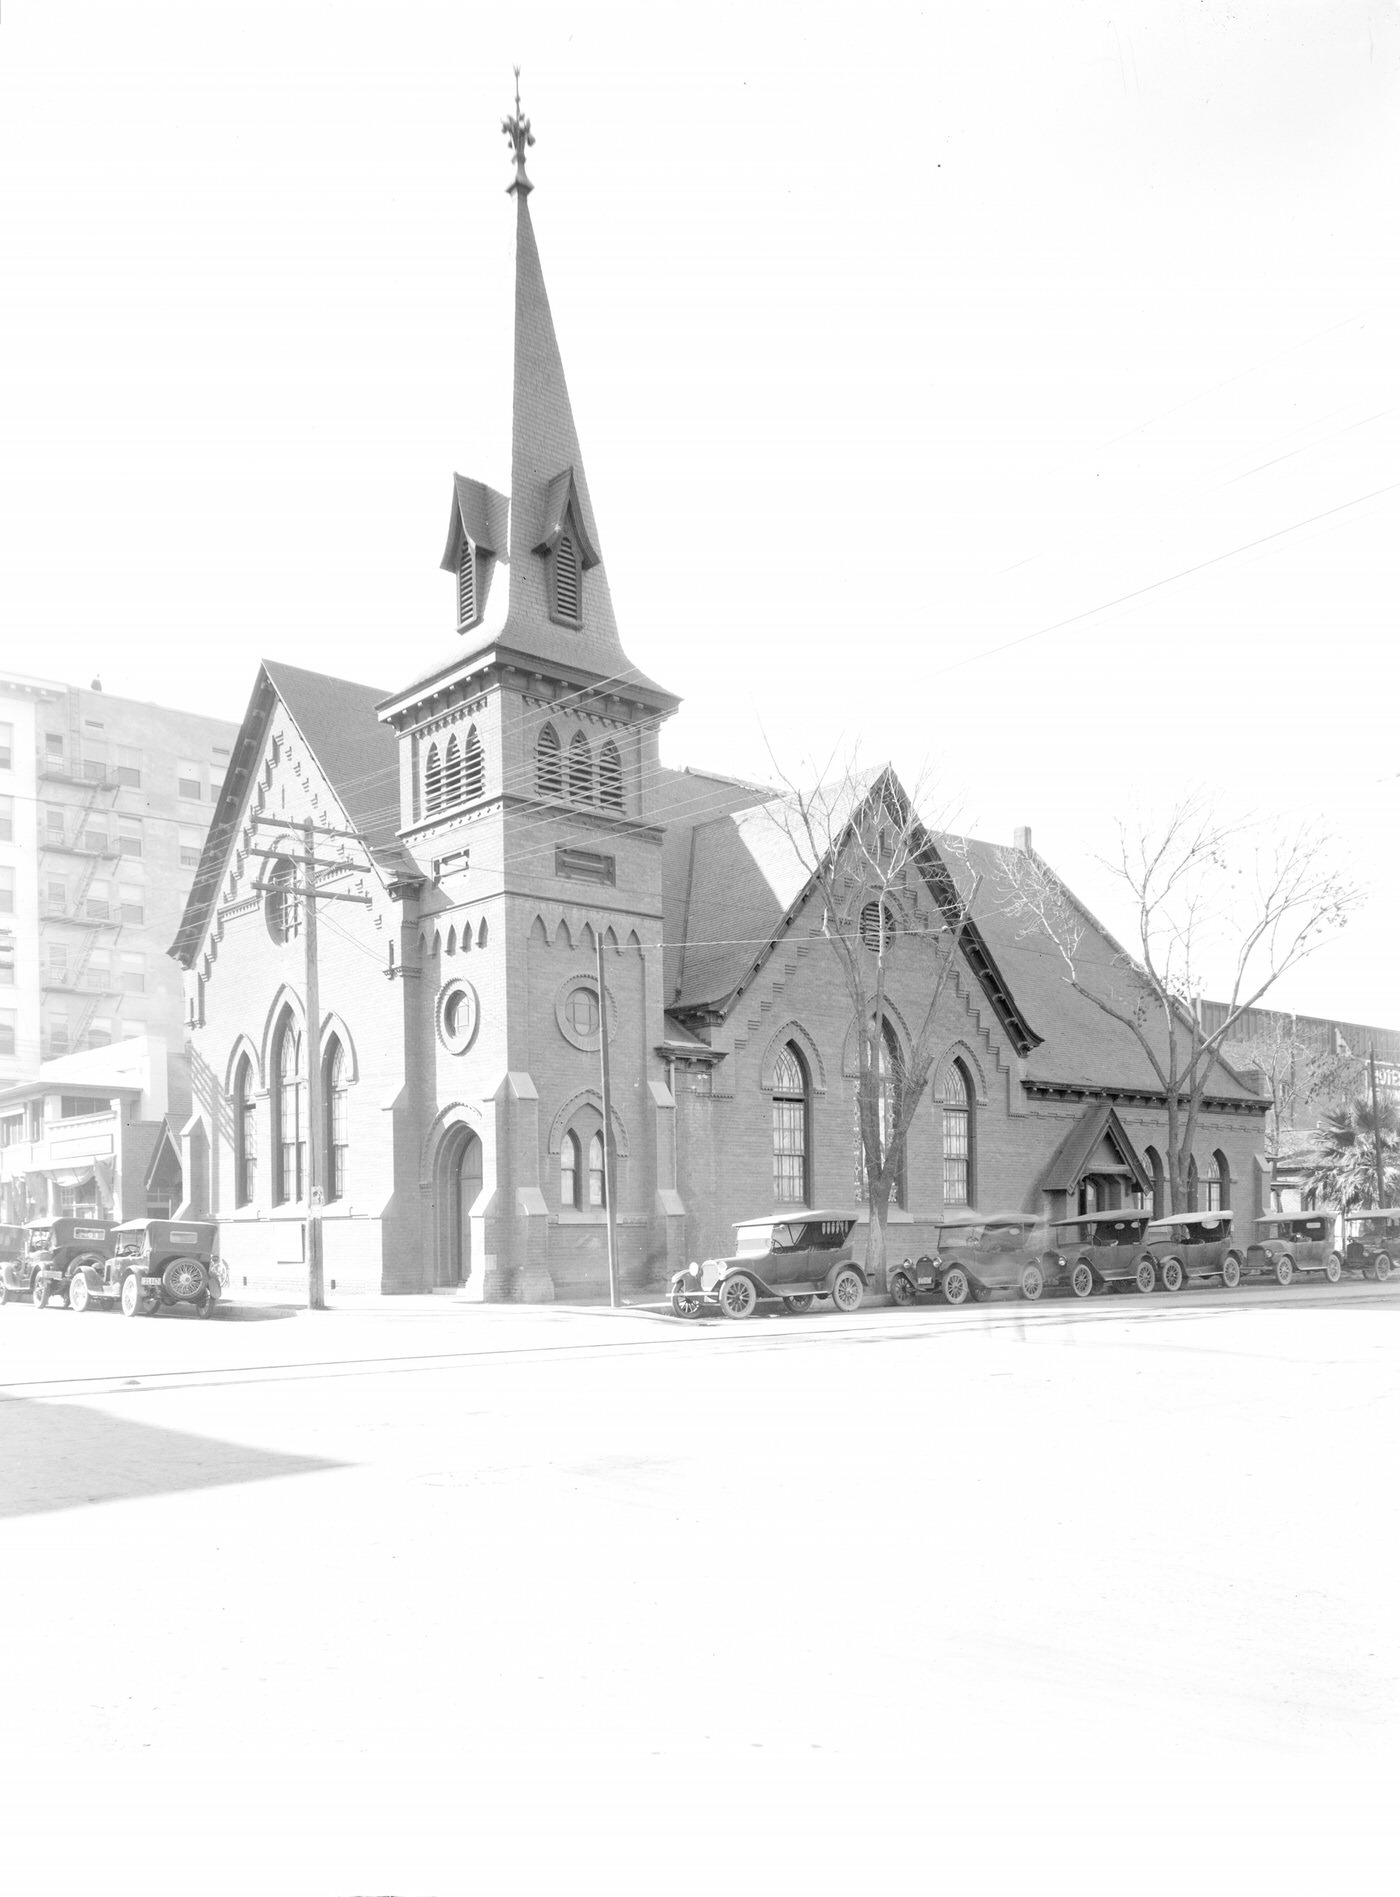 Central Methodist Church Building Exterior, 1930s. Central Methodist was located on the southwest corner of Central Avenue and Monroe Street.